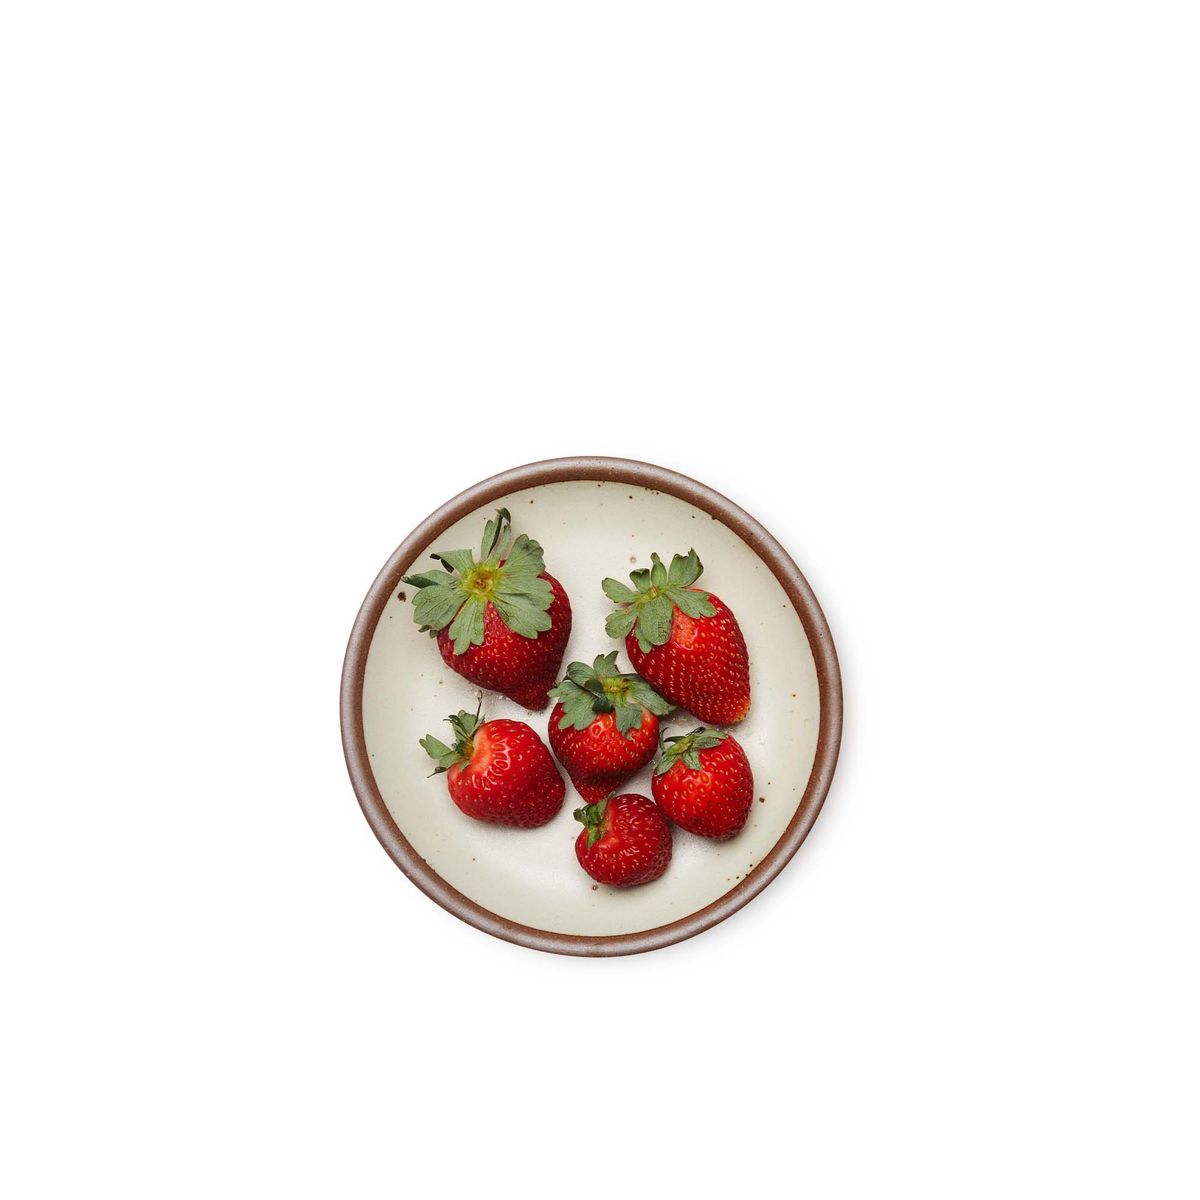 Strawberries on a dessert sized ceramic plate in a warm, tan-toned, off-white color featuring iron speckles and an unglazed rim.